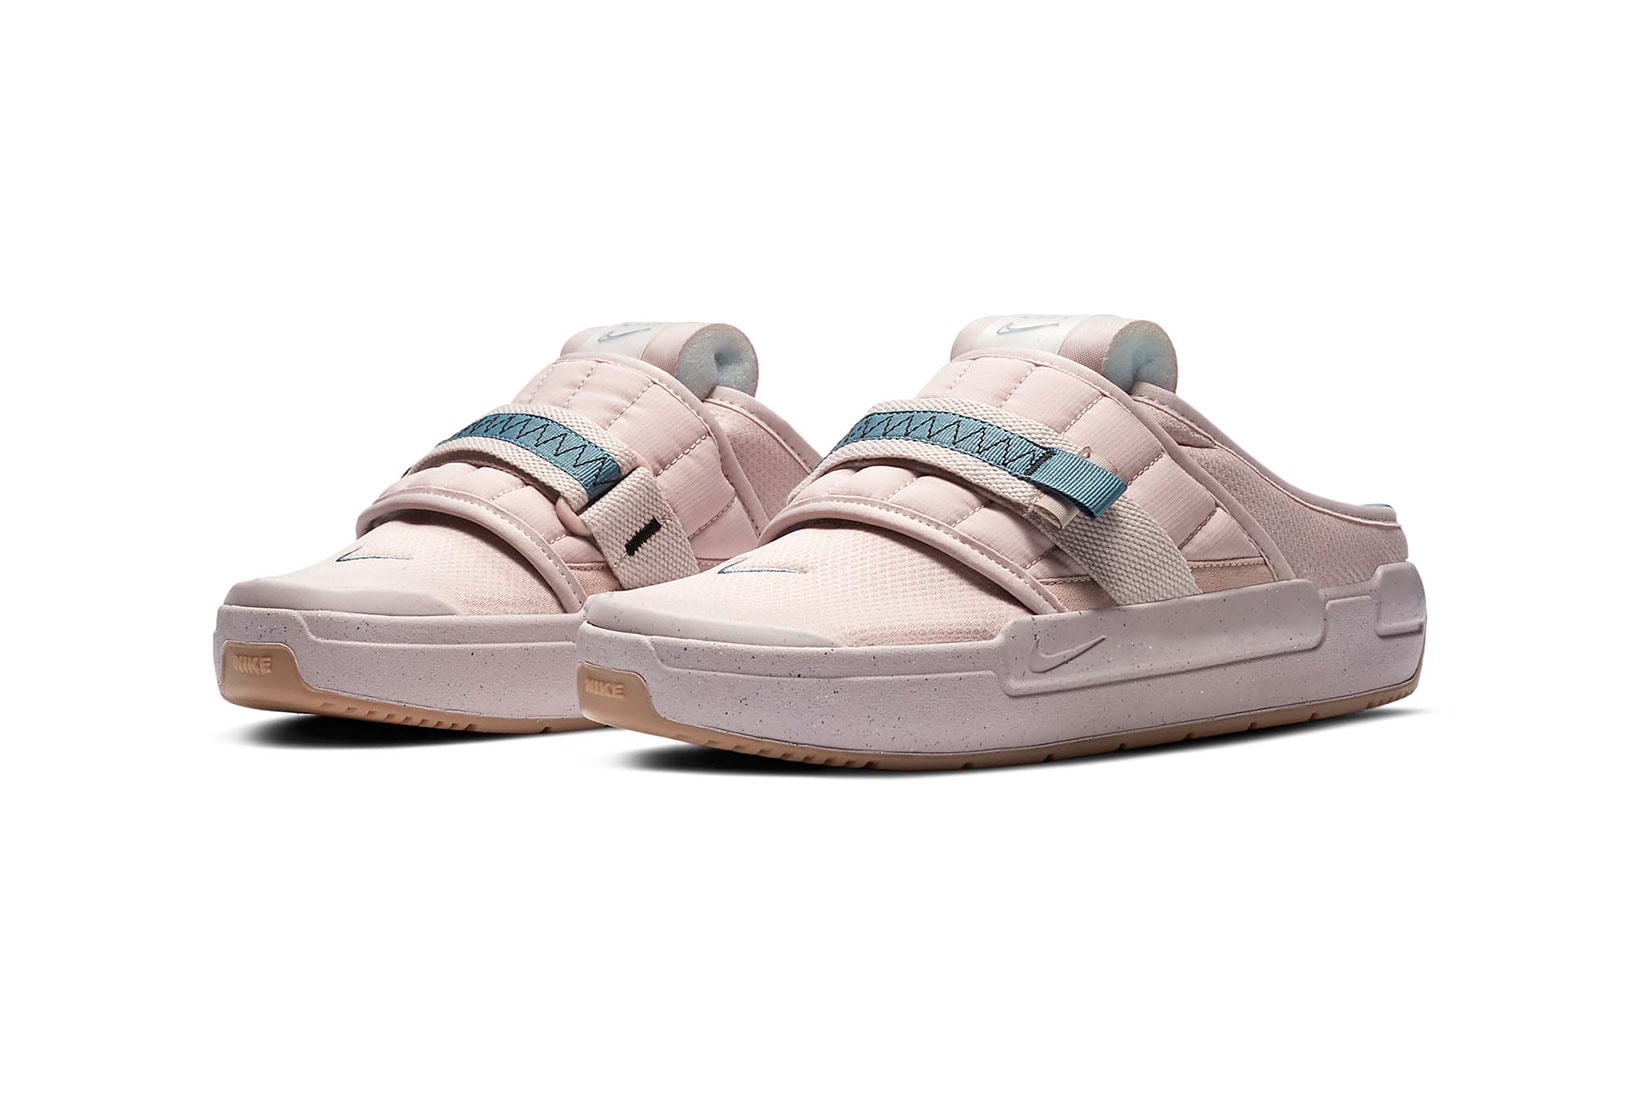 nike offline mules sandals slippers dusty pink colorway footwear shoes stone mauve